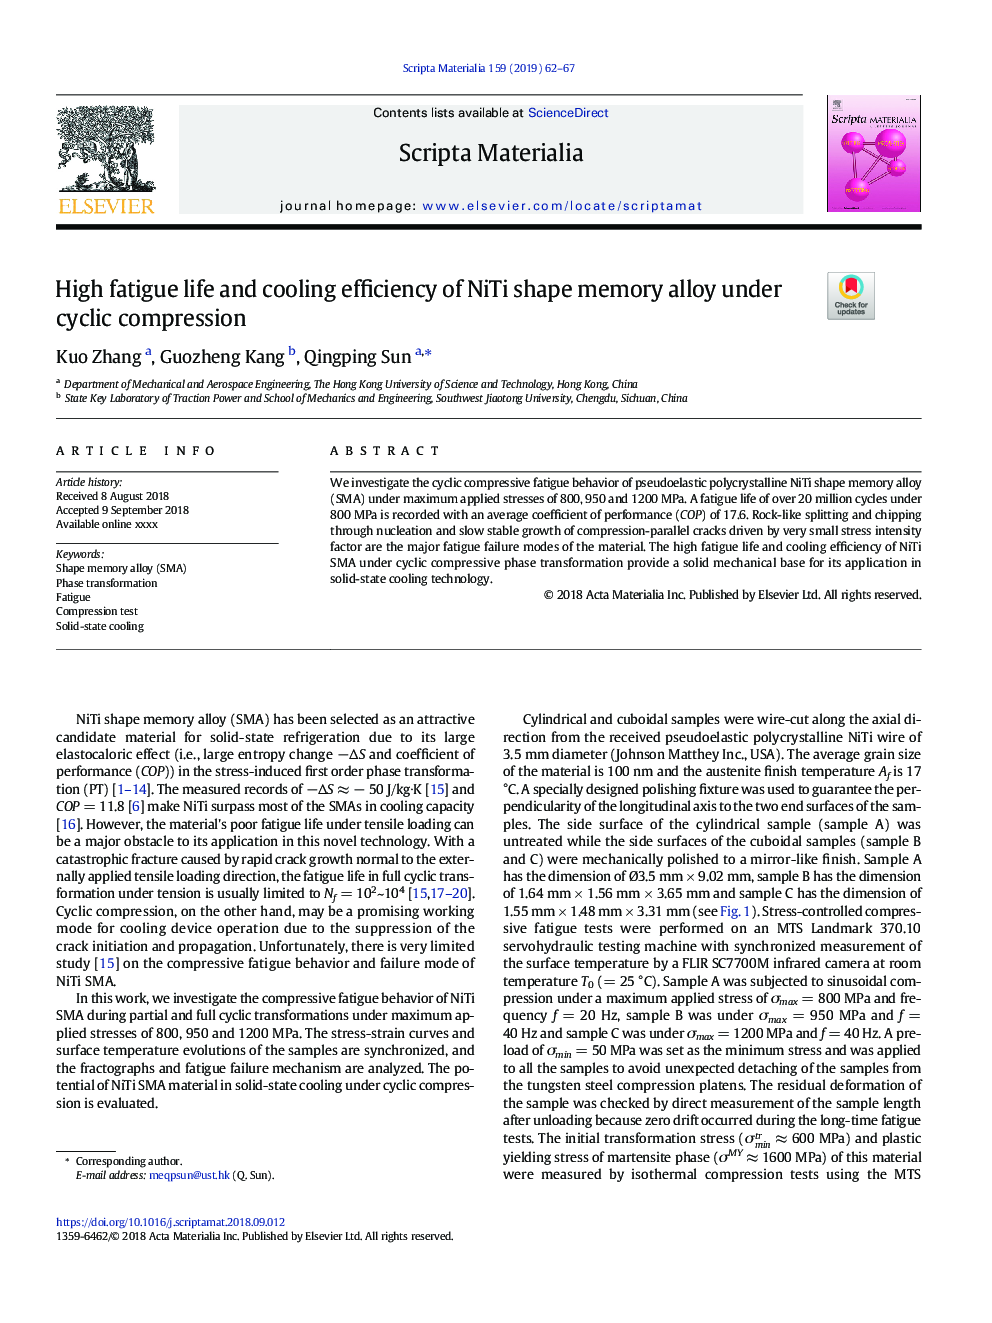 High fatigue life and cooling efficiency of NiTi shape memory alloy under cyclic compression